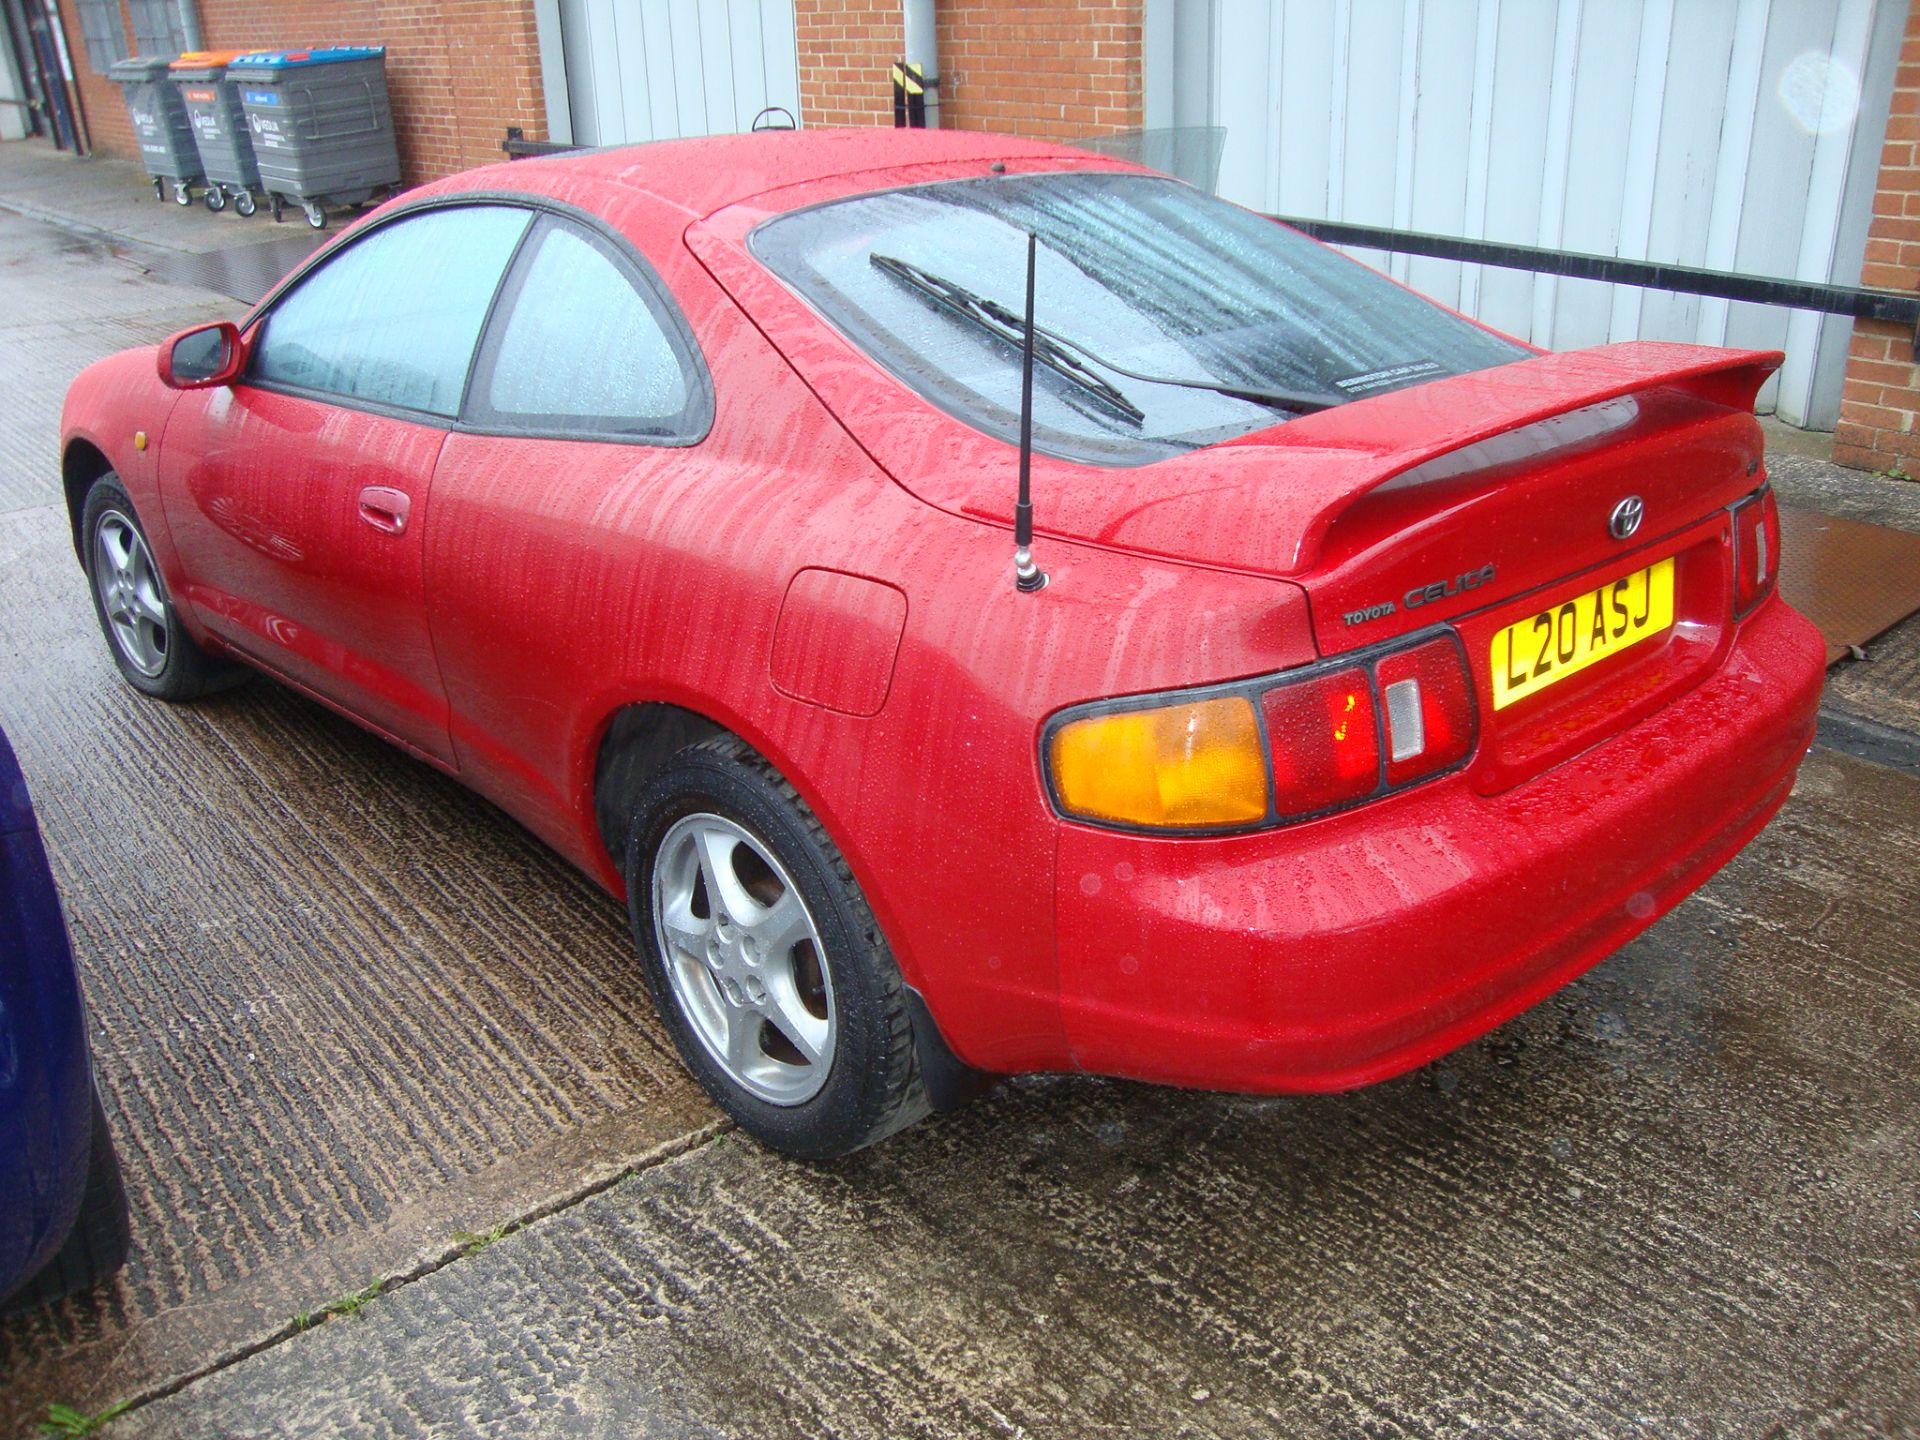 1994 Toyota Celica GT Coupe - Image 6 of 16